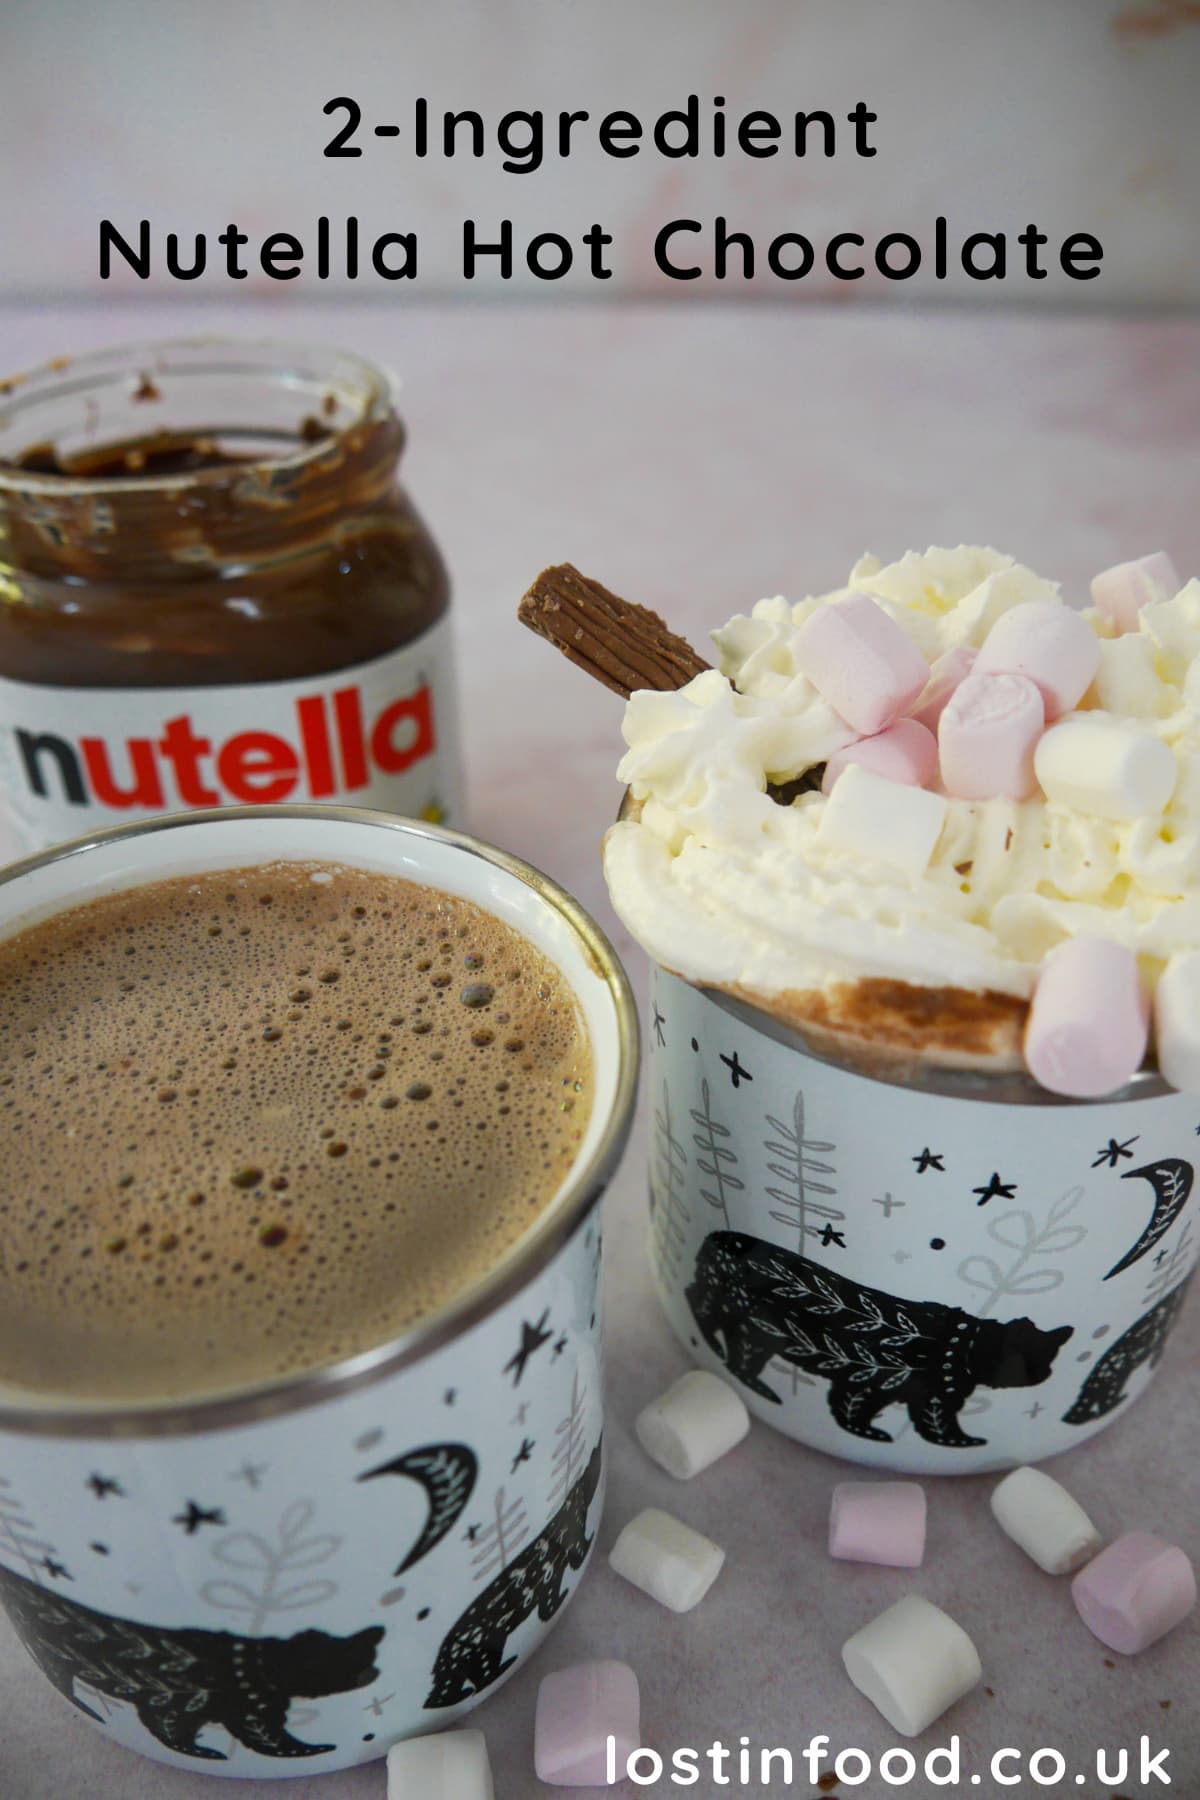 Pinnable image with two mugs of hot chocolate, one topped with whipped cream, mini marshmallows and a chocolate log, with an open jar of Nutella, mini marshmallows and chocolate logs set alongside.